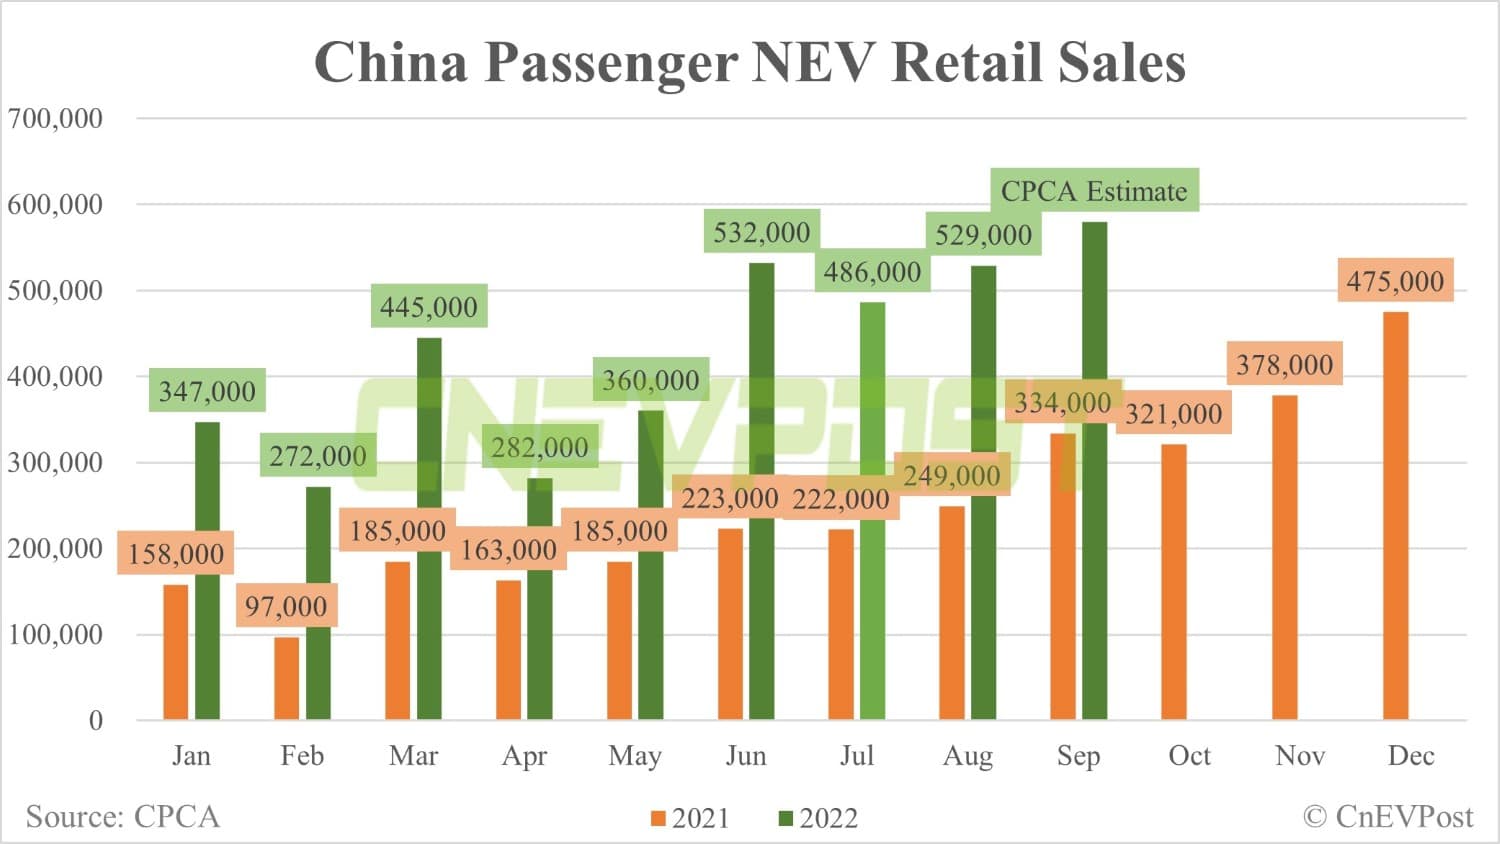 China's retail sales of NEVs expected to be record 580,000 in Sept, CPCA estimates show-CnEVPost